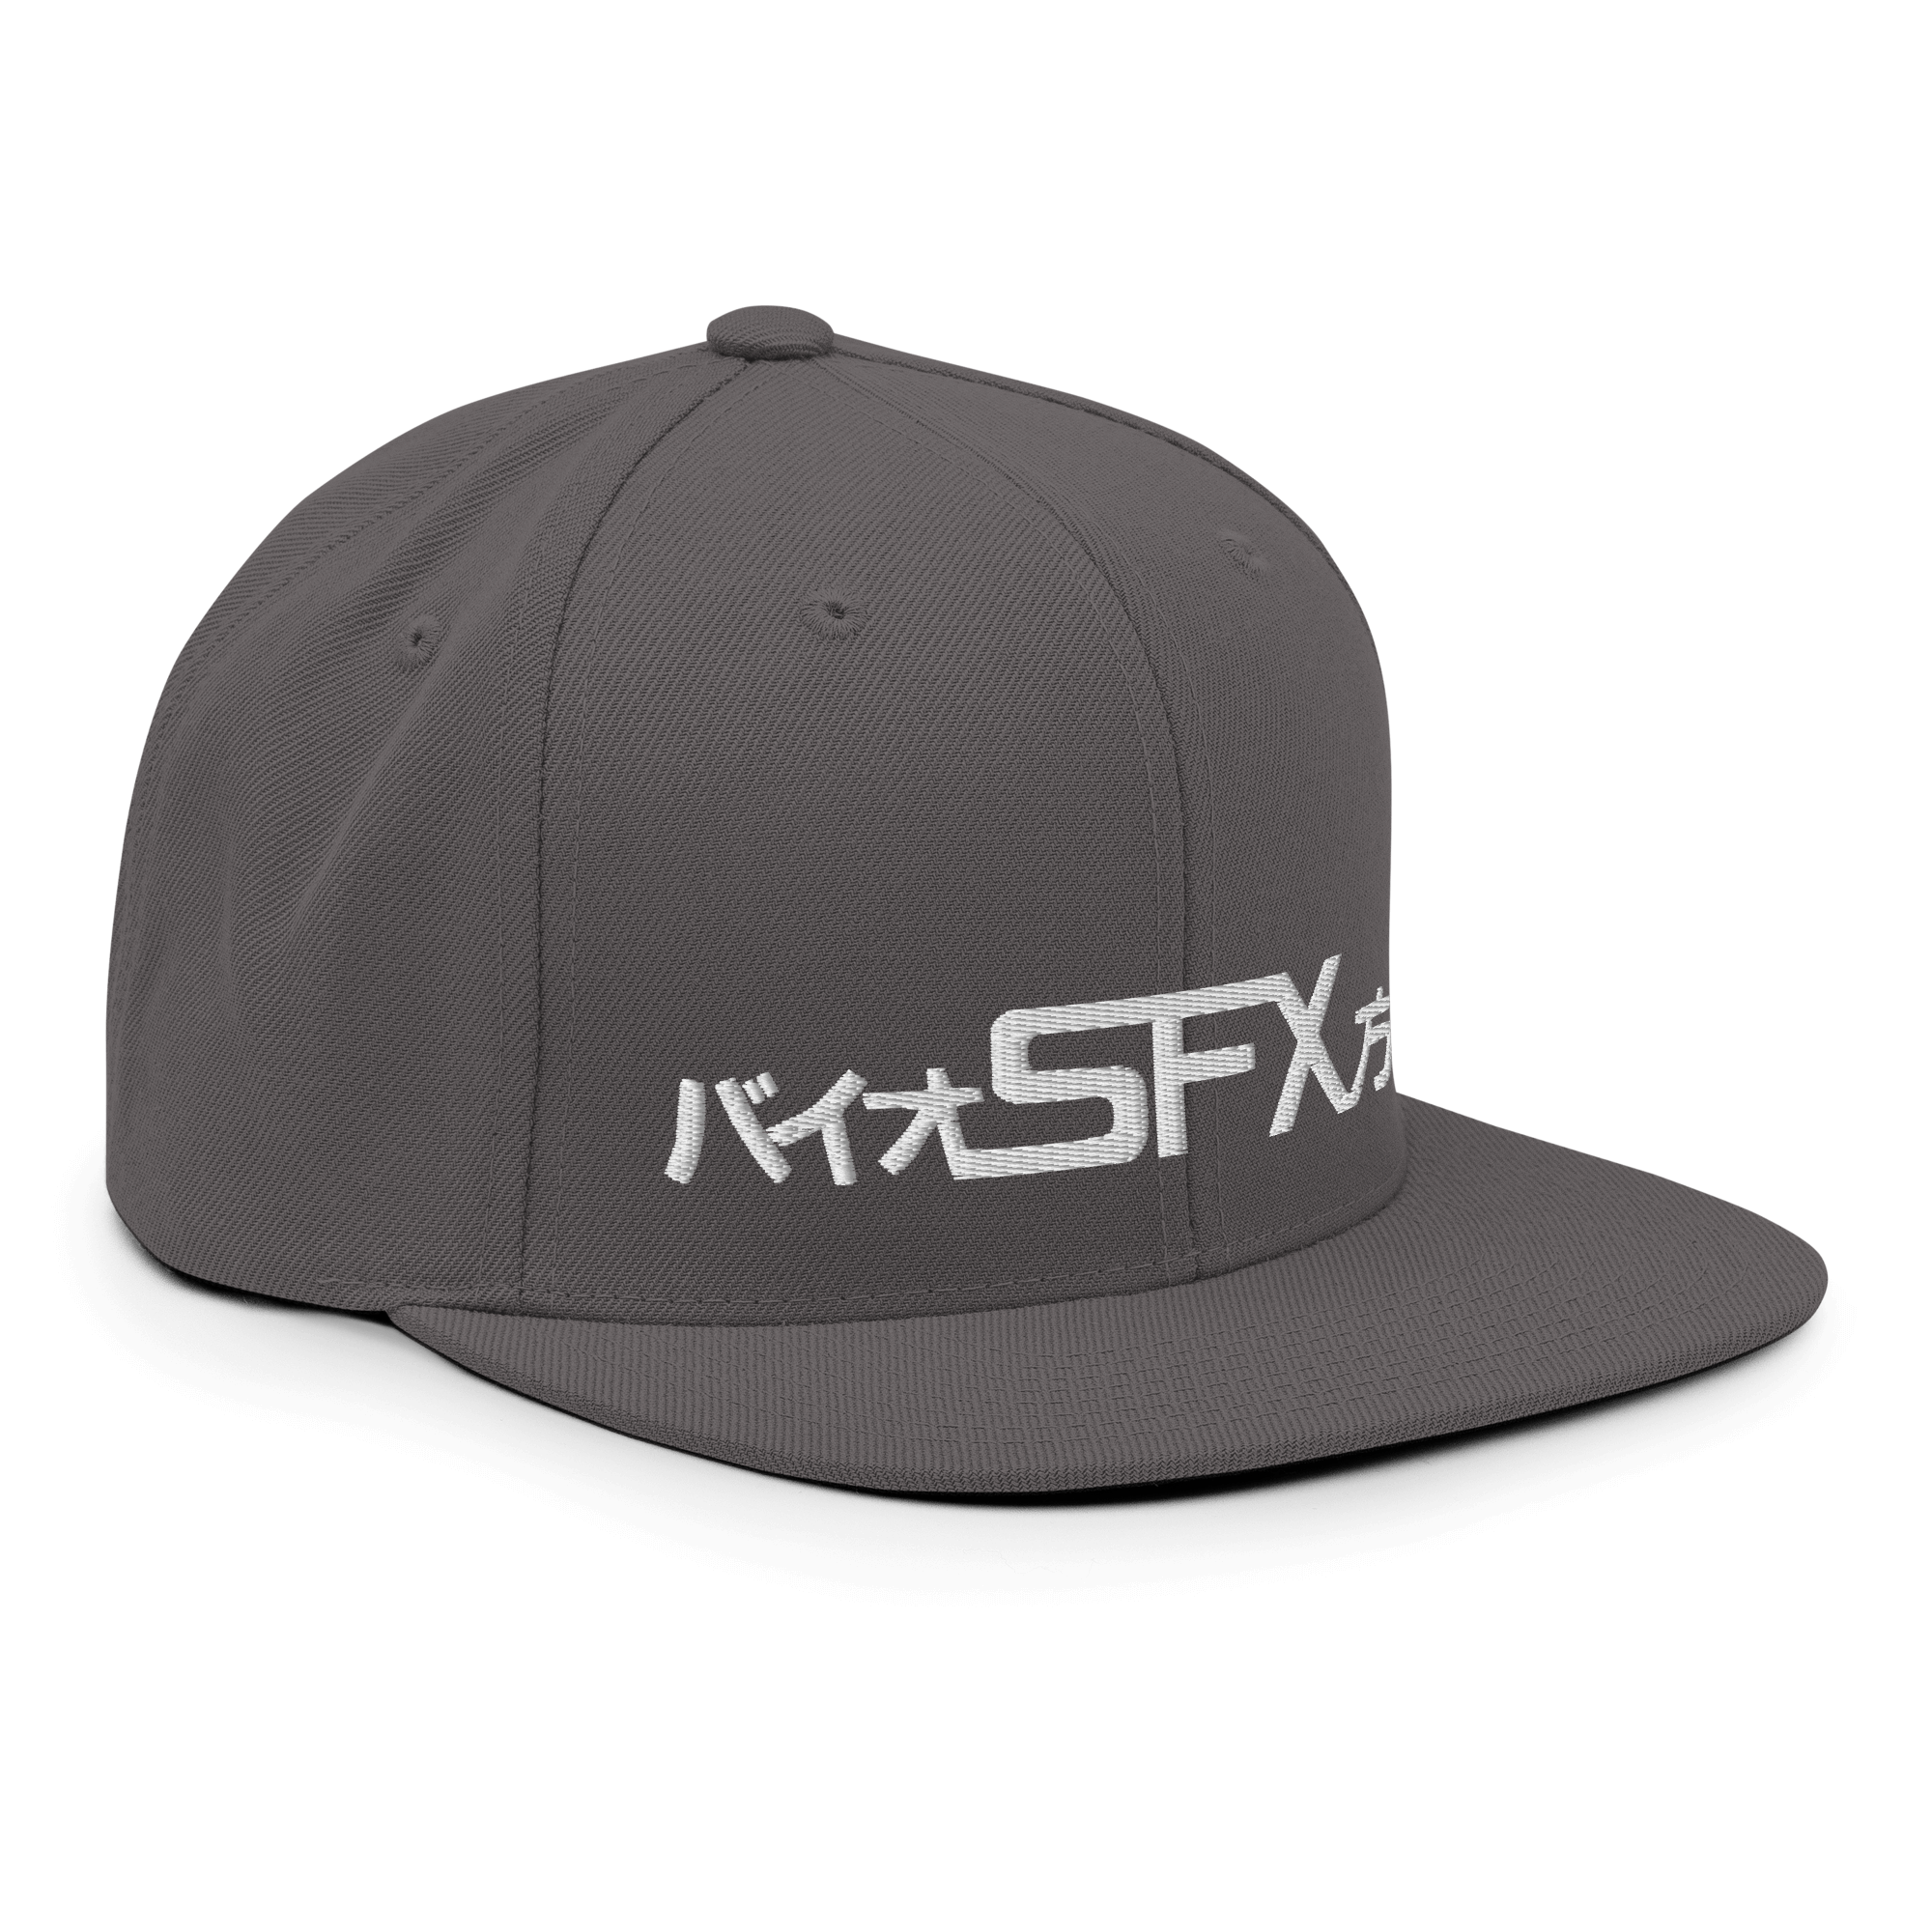 Bio SFX Snapback CapIndulge in the enigmatic allure of our logo – a captivating fusion of katakana and kanji in the bio-SFX style. The hat itself is structured with a classic fit, flat brim, and full buckram, embodying timeless cool. The adjustable snap c